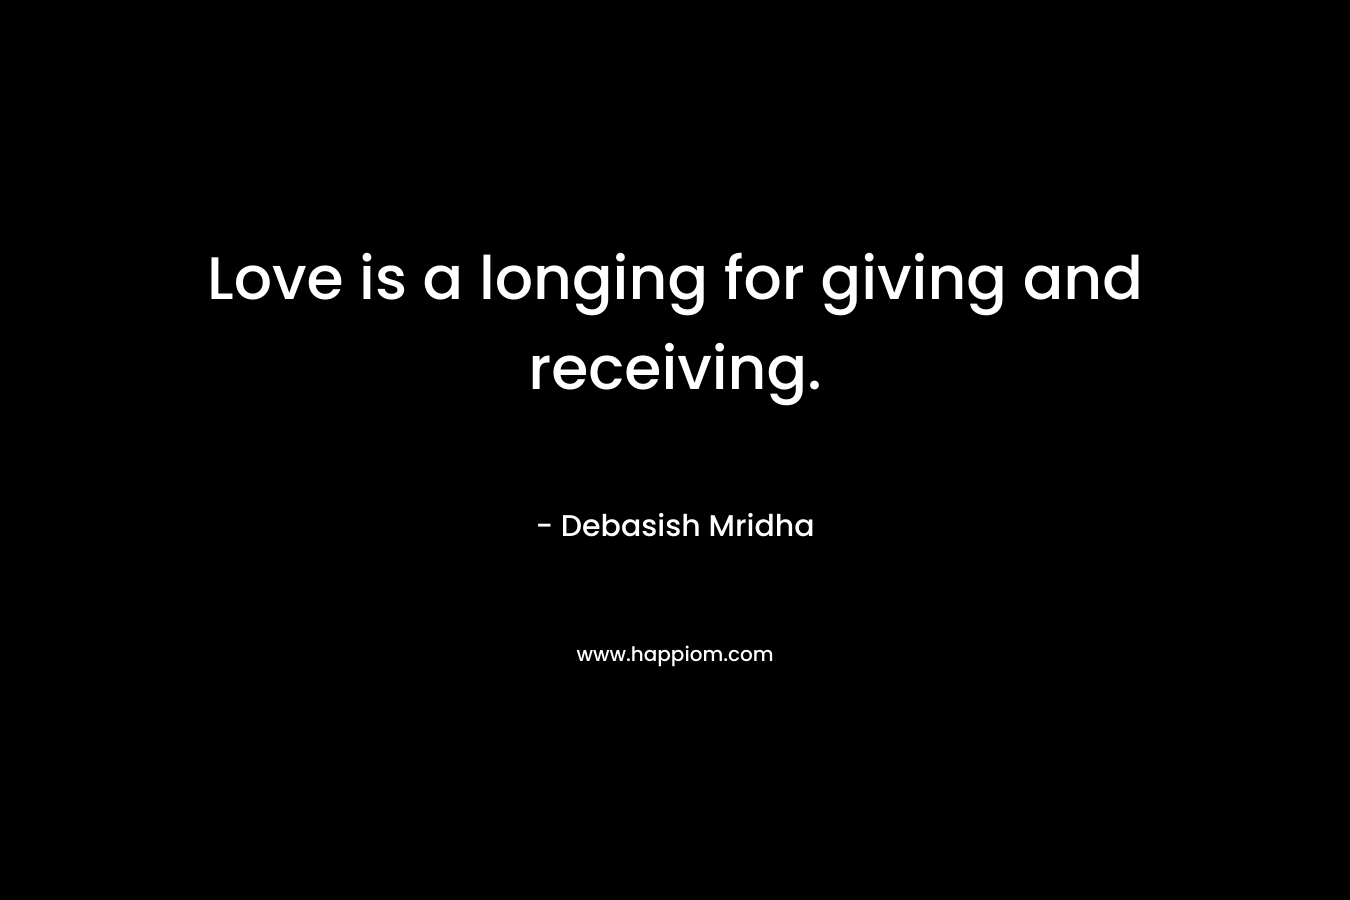 Love is a longing for giving and receiving.